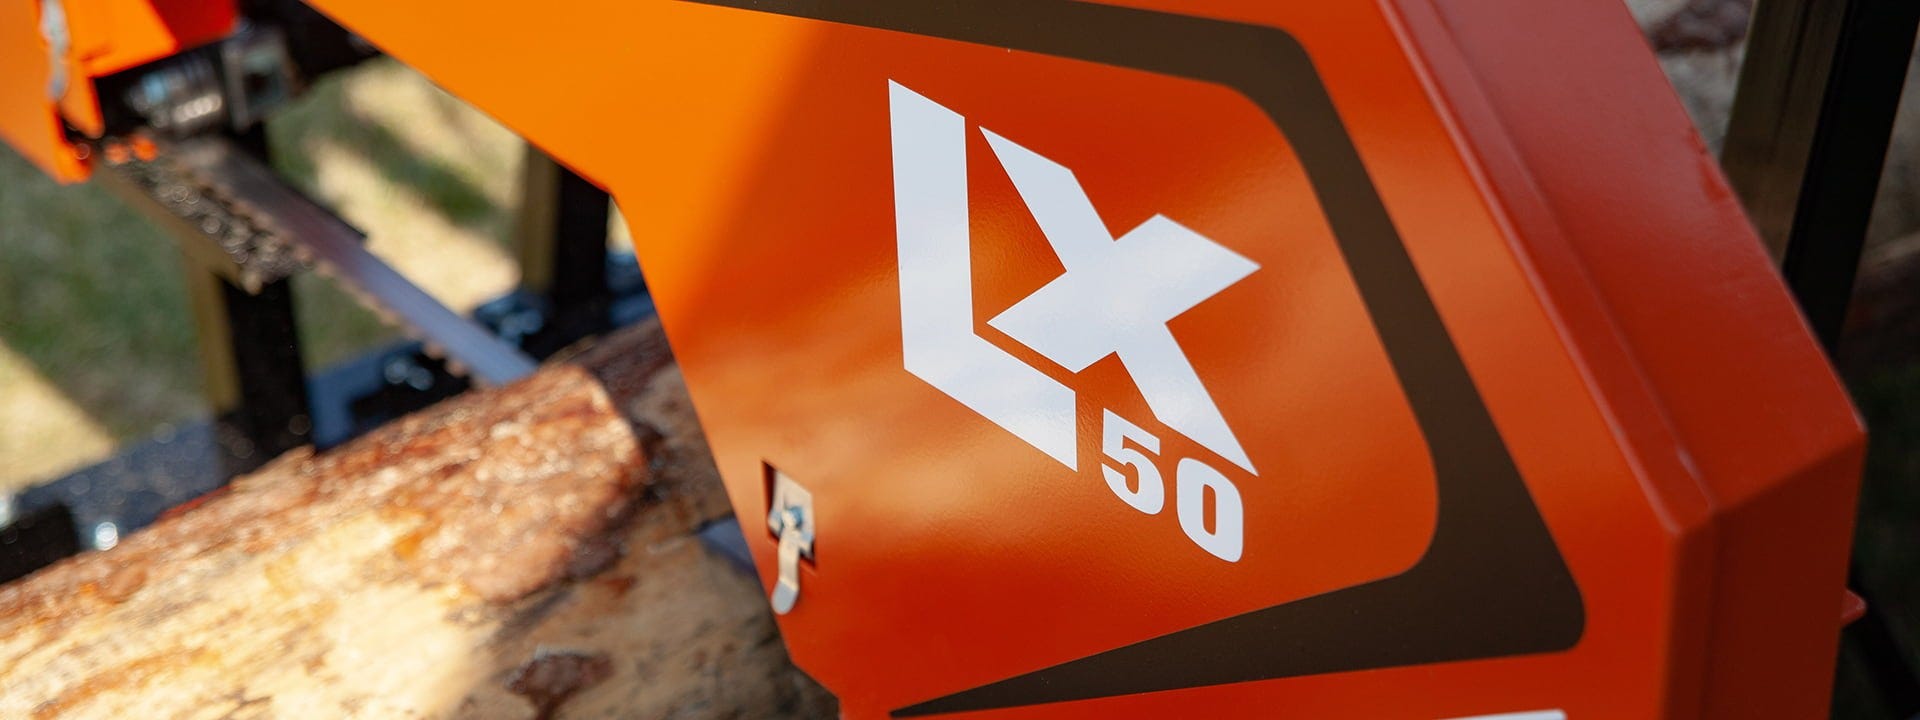 LX50 is the smallest and most inexpensive band saw available from Wood-Mizer